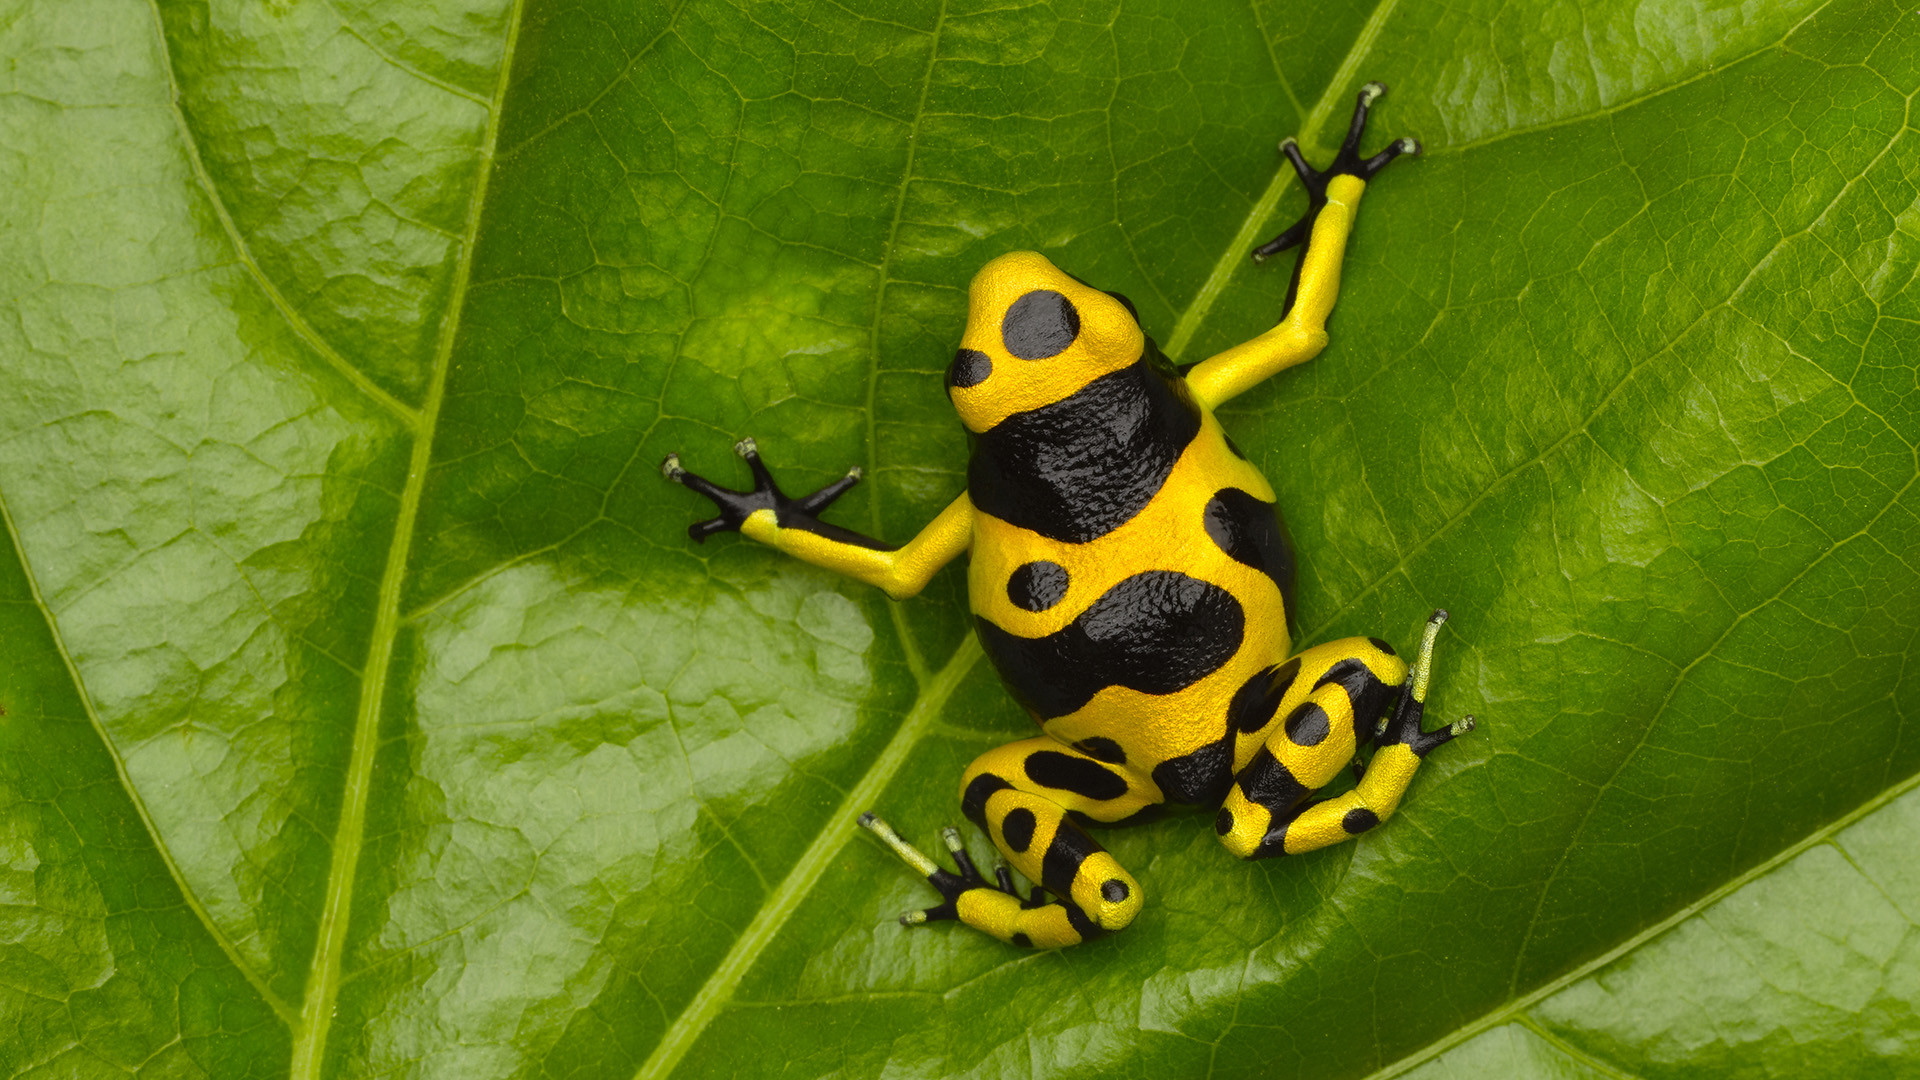 1920x1080 44 Poison dart frog HD Wallpapers | Backgrounds - Wallpaper Abyss - Page 2